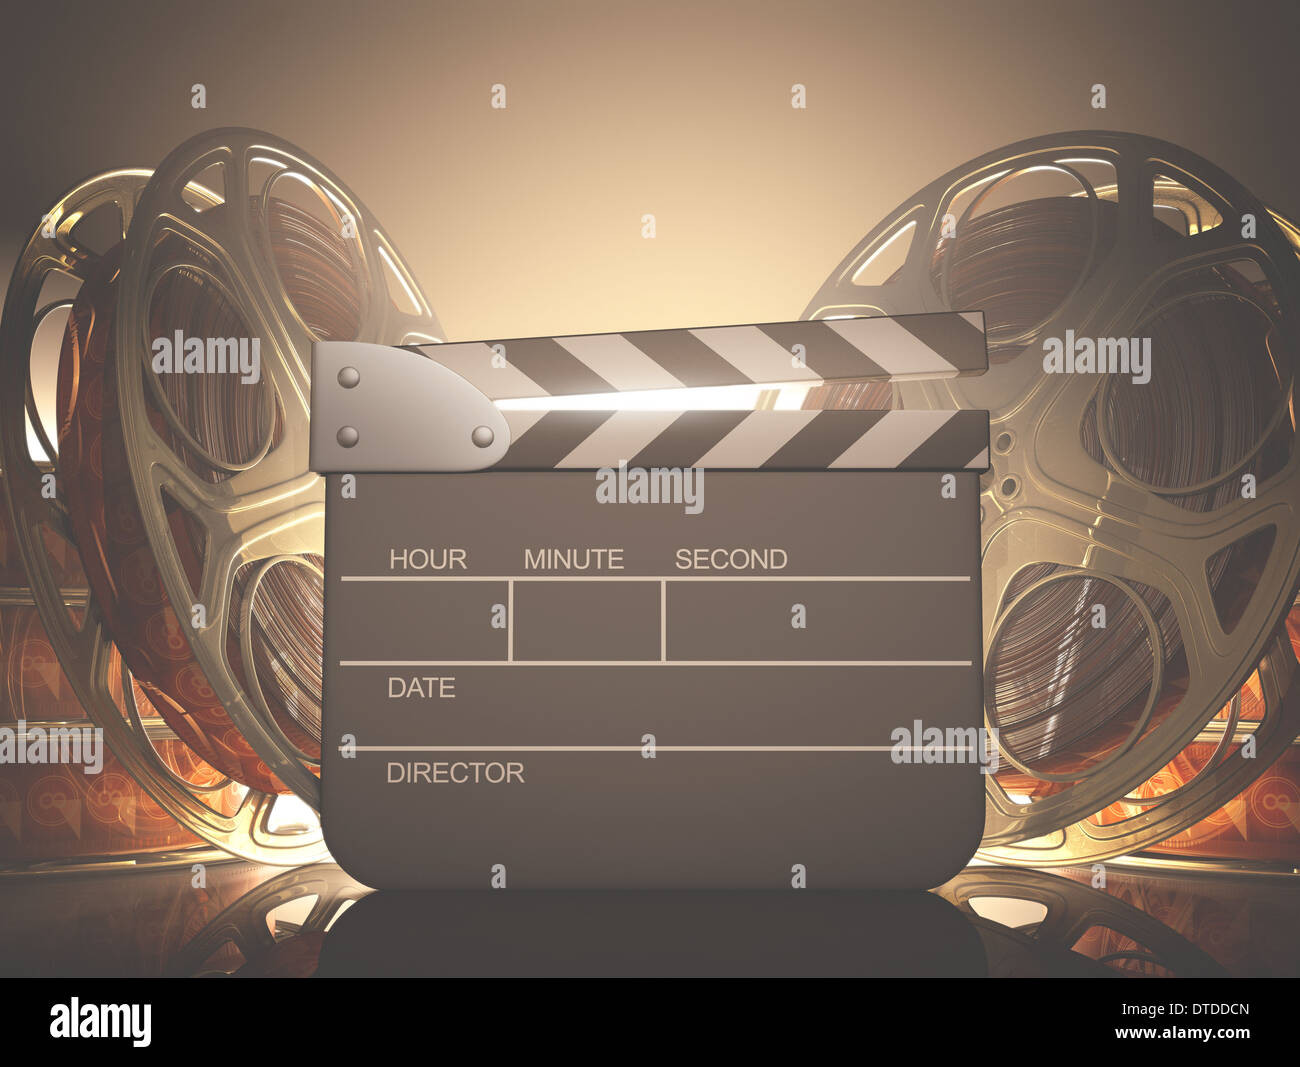 Clapboard with back light. Your name, time and date on clapboard. Stock Photo